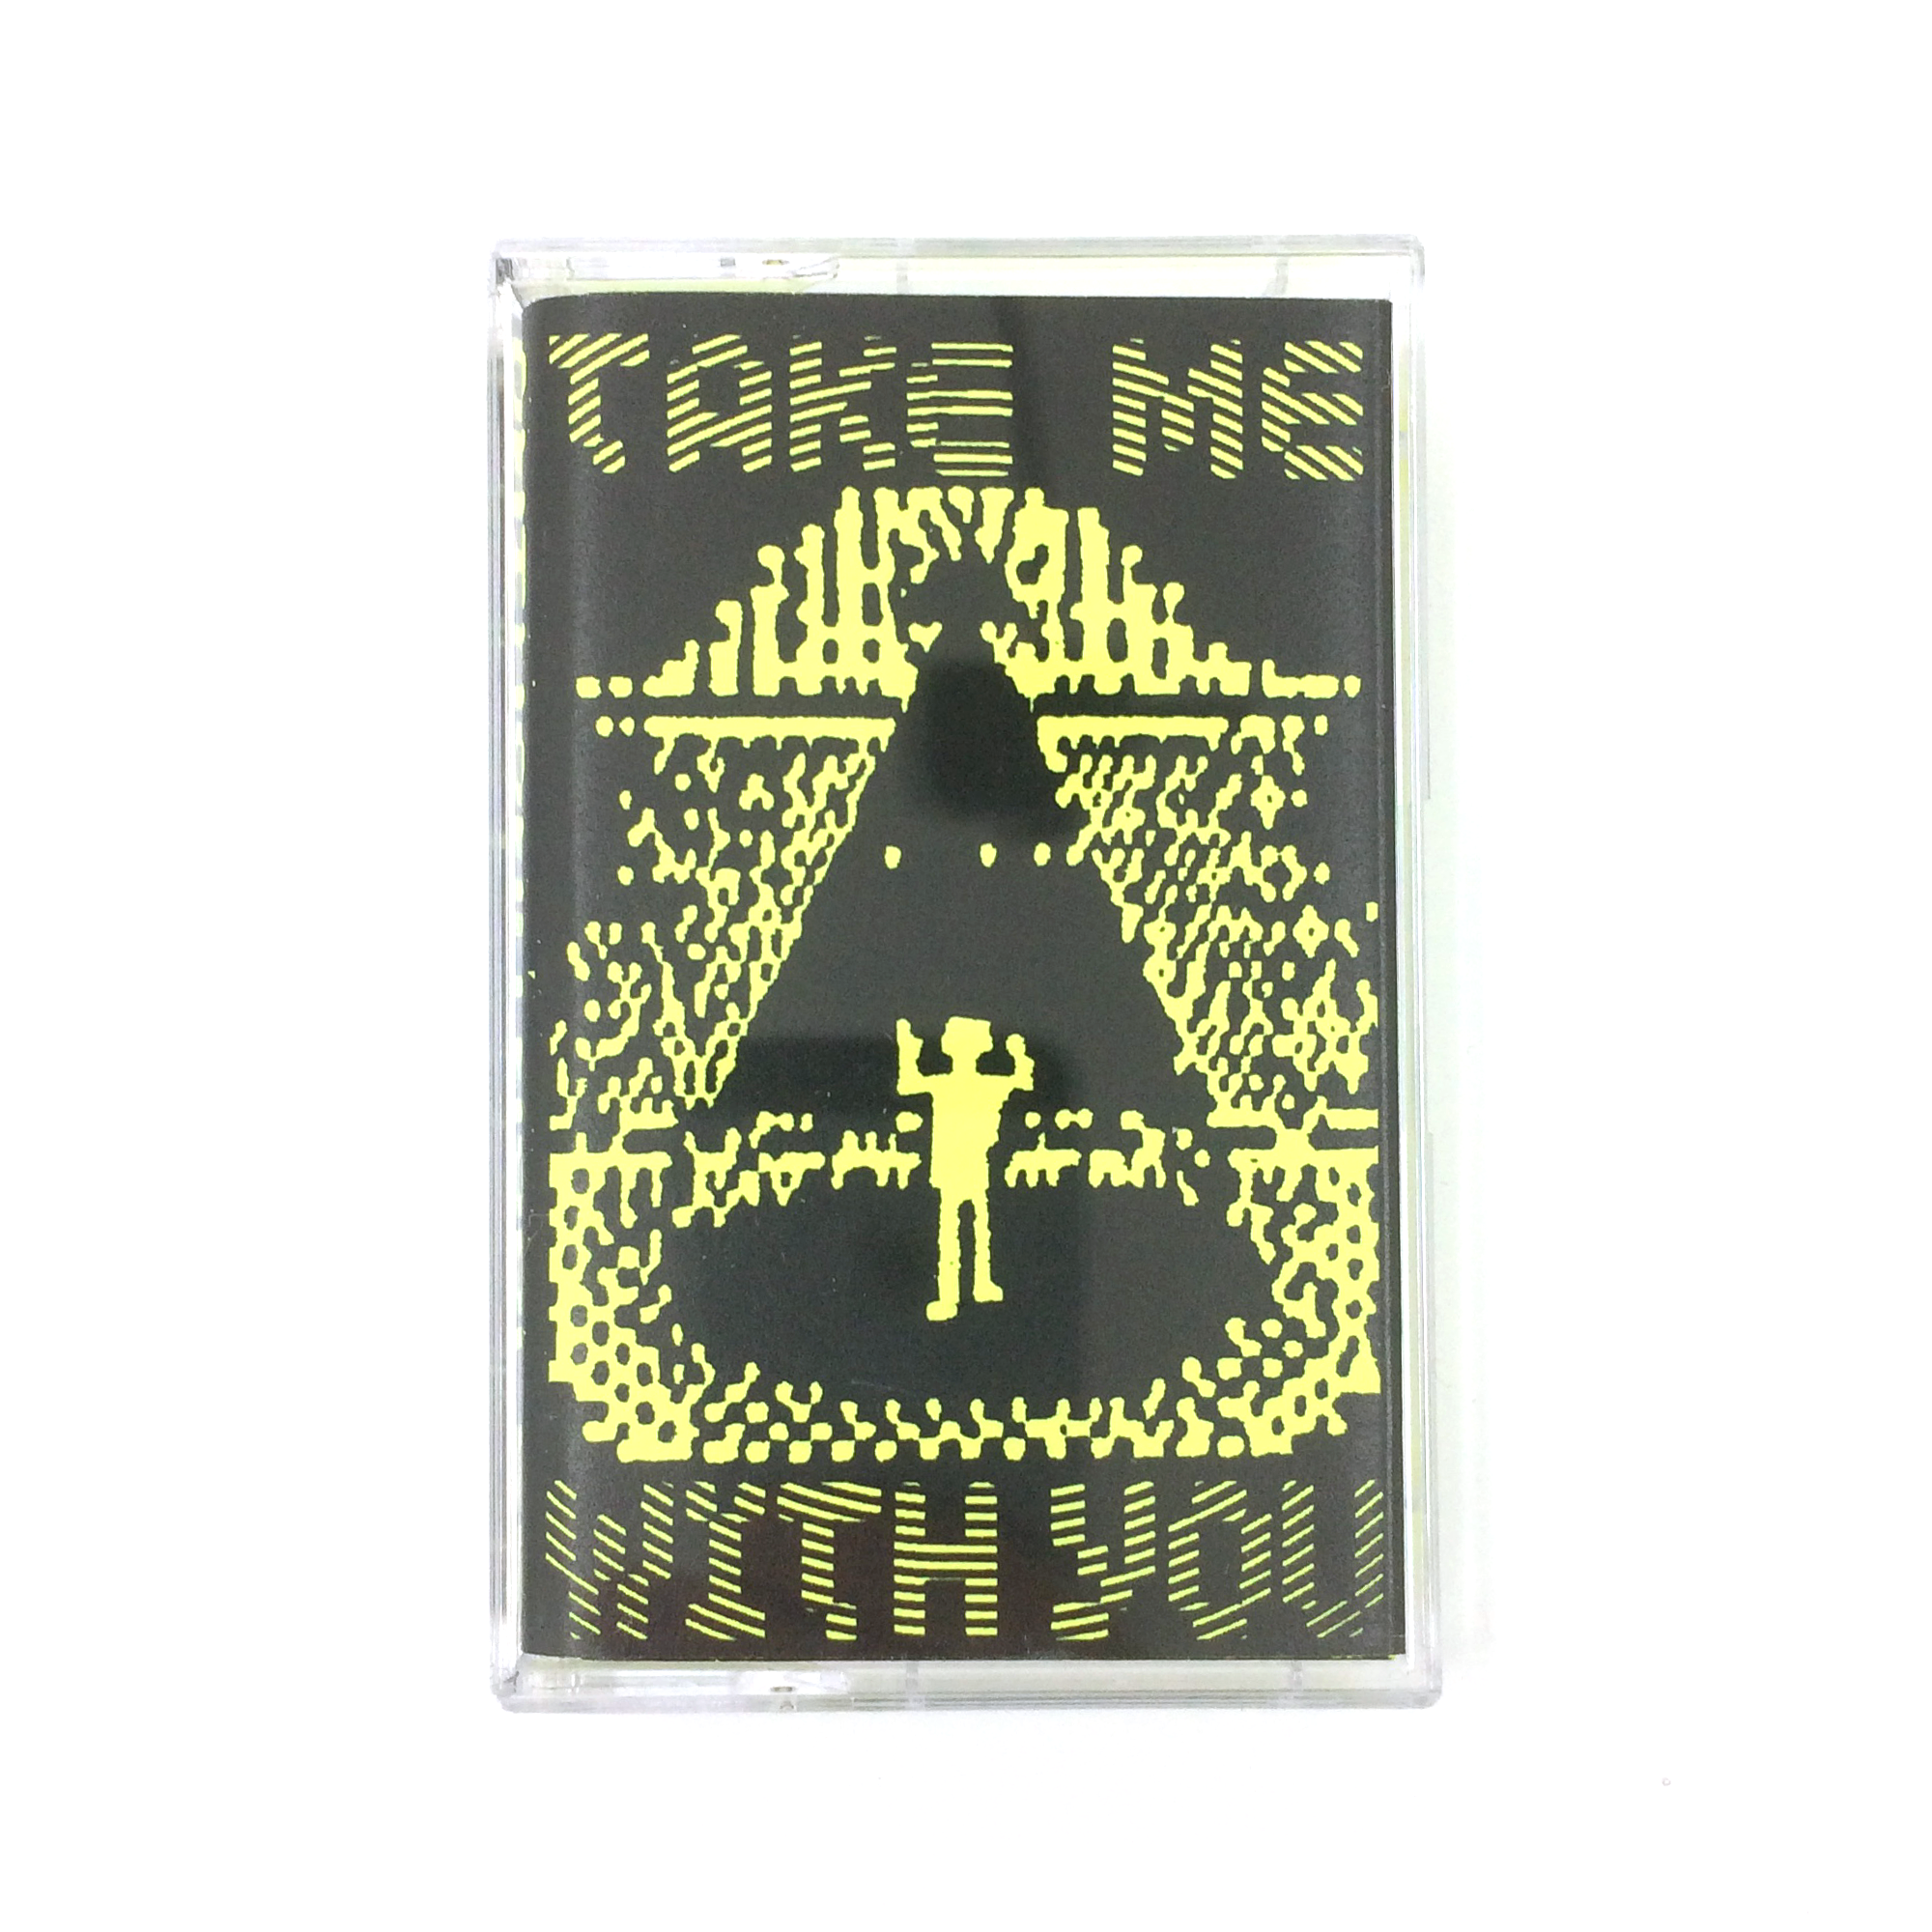 Anthony Naples - Take Me With You - Out Of Joint Records